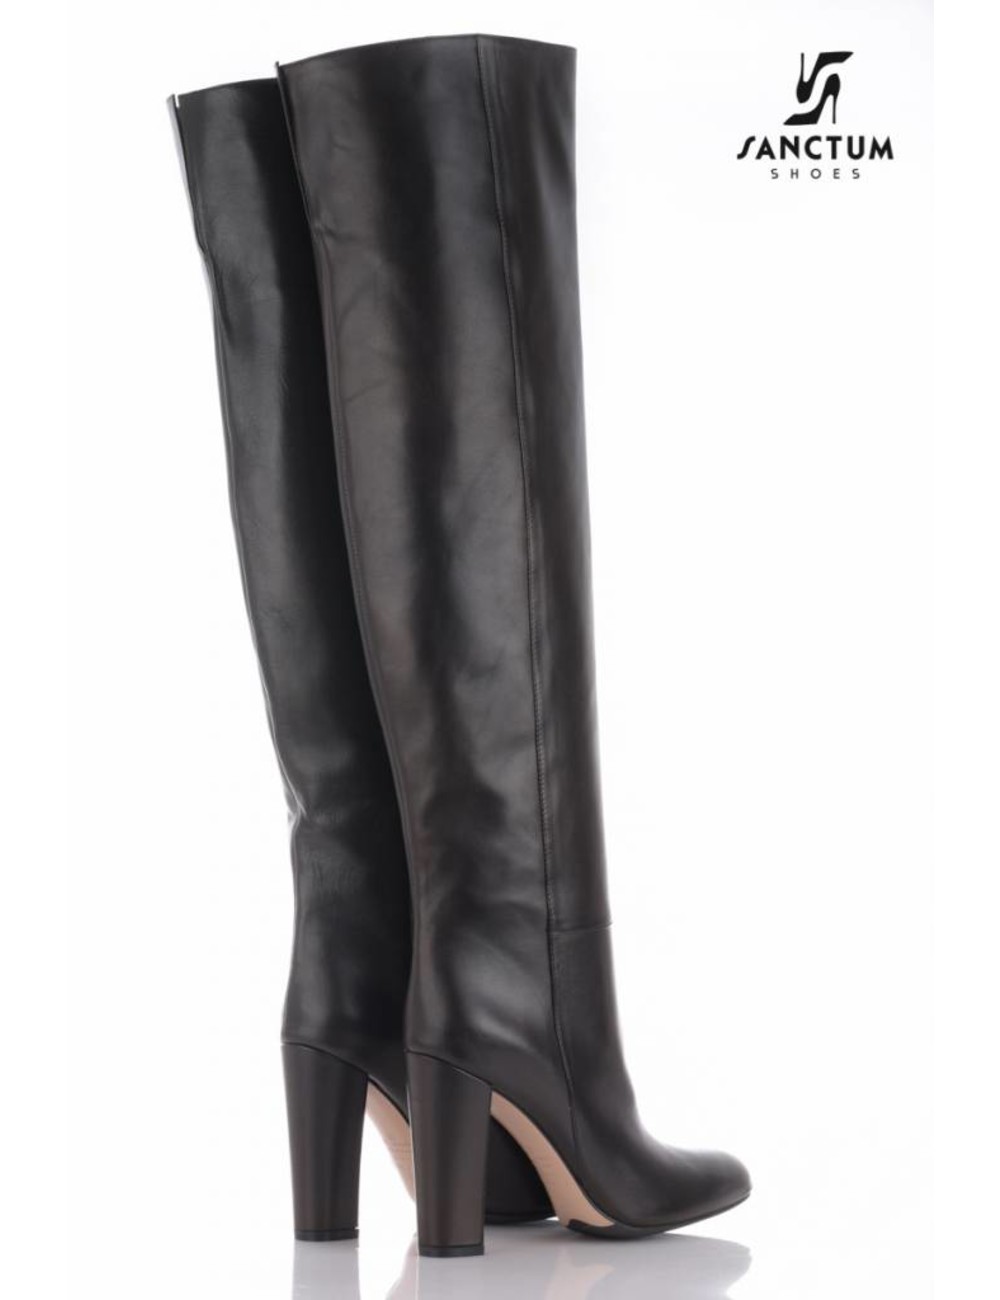 black leather crotch high boots